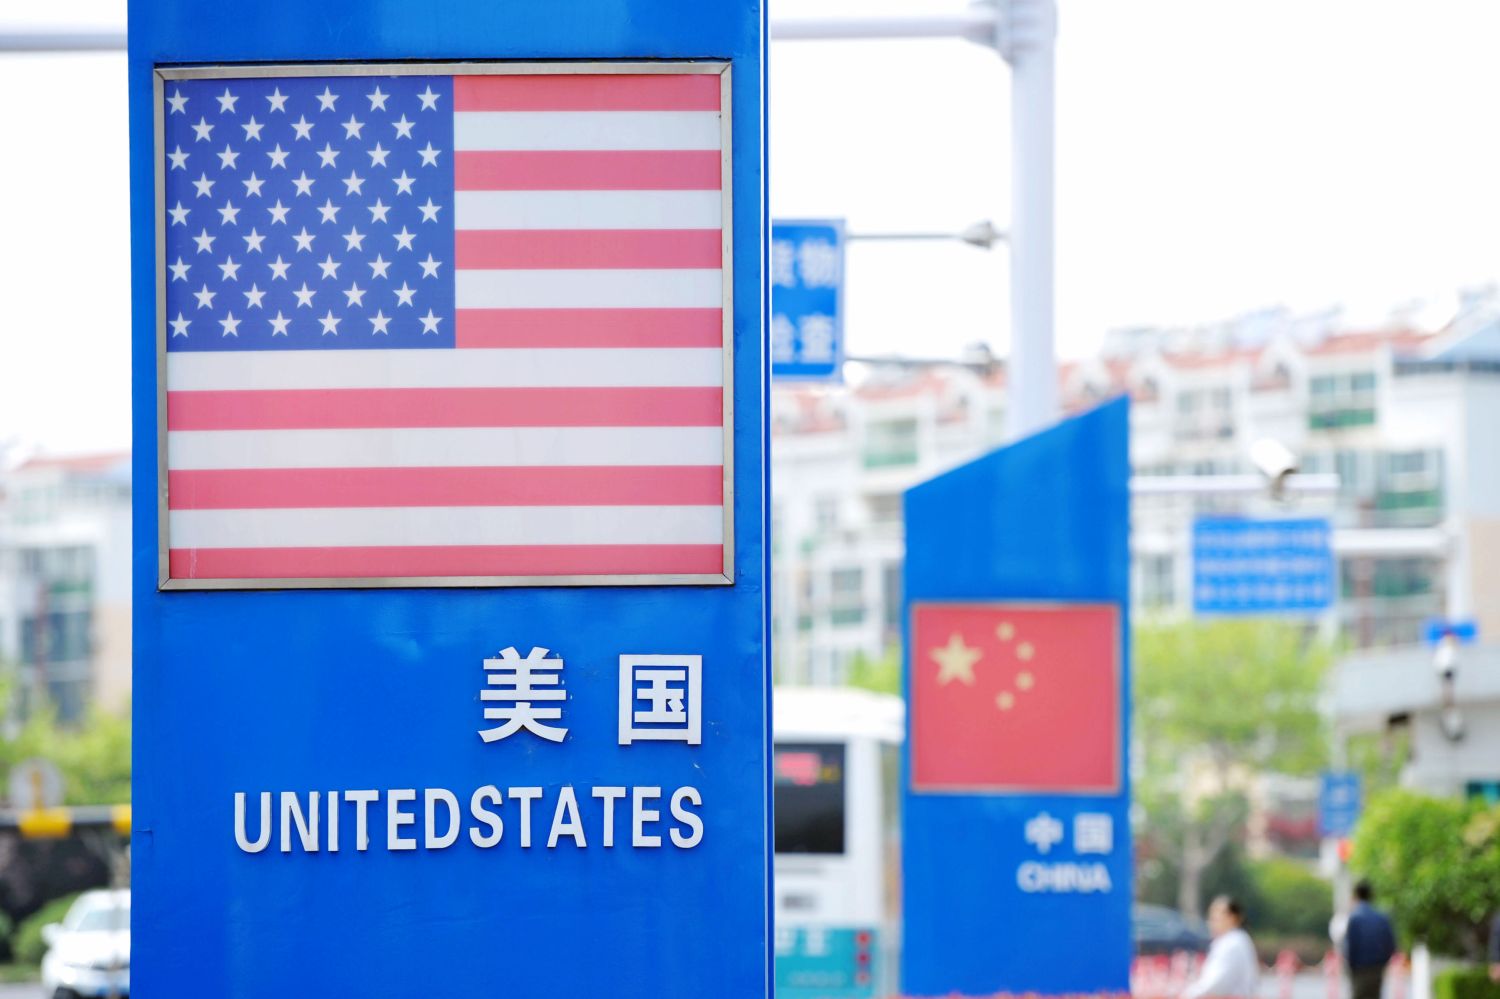 Signboards showing the flags of the United States and China are seen on a street in Qingdao, China.